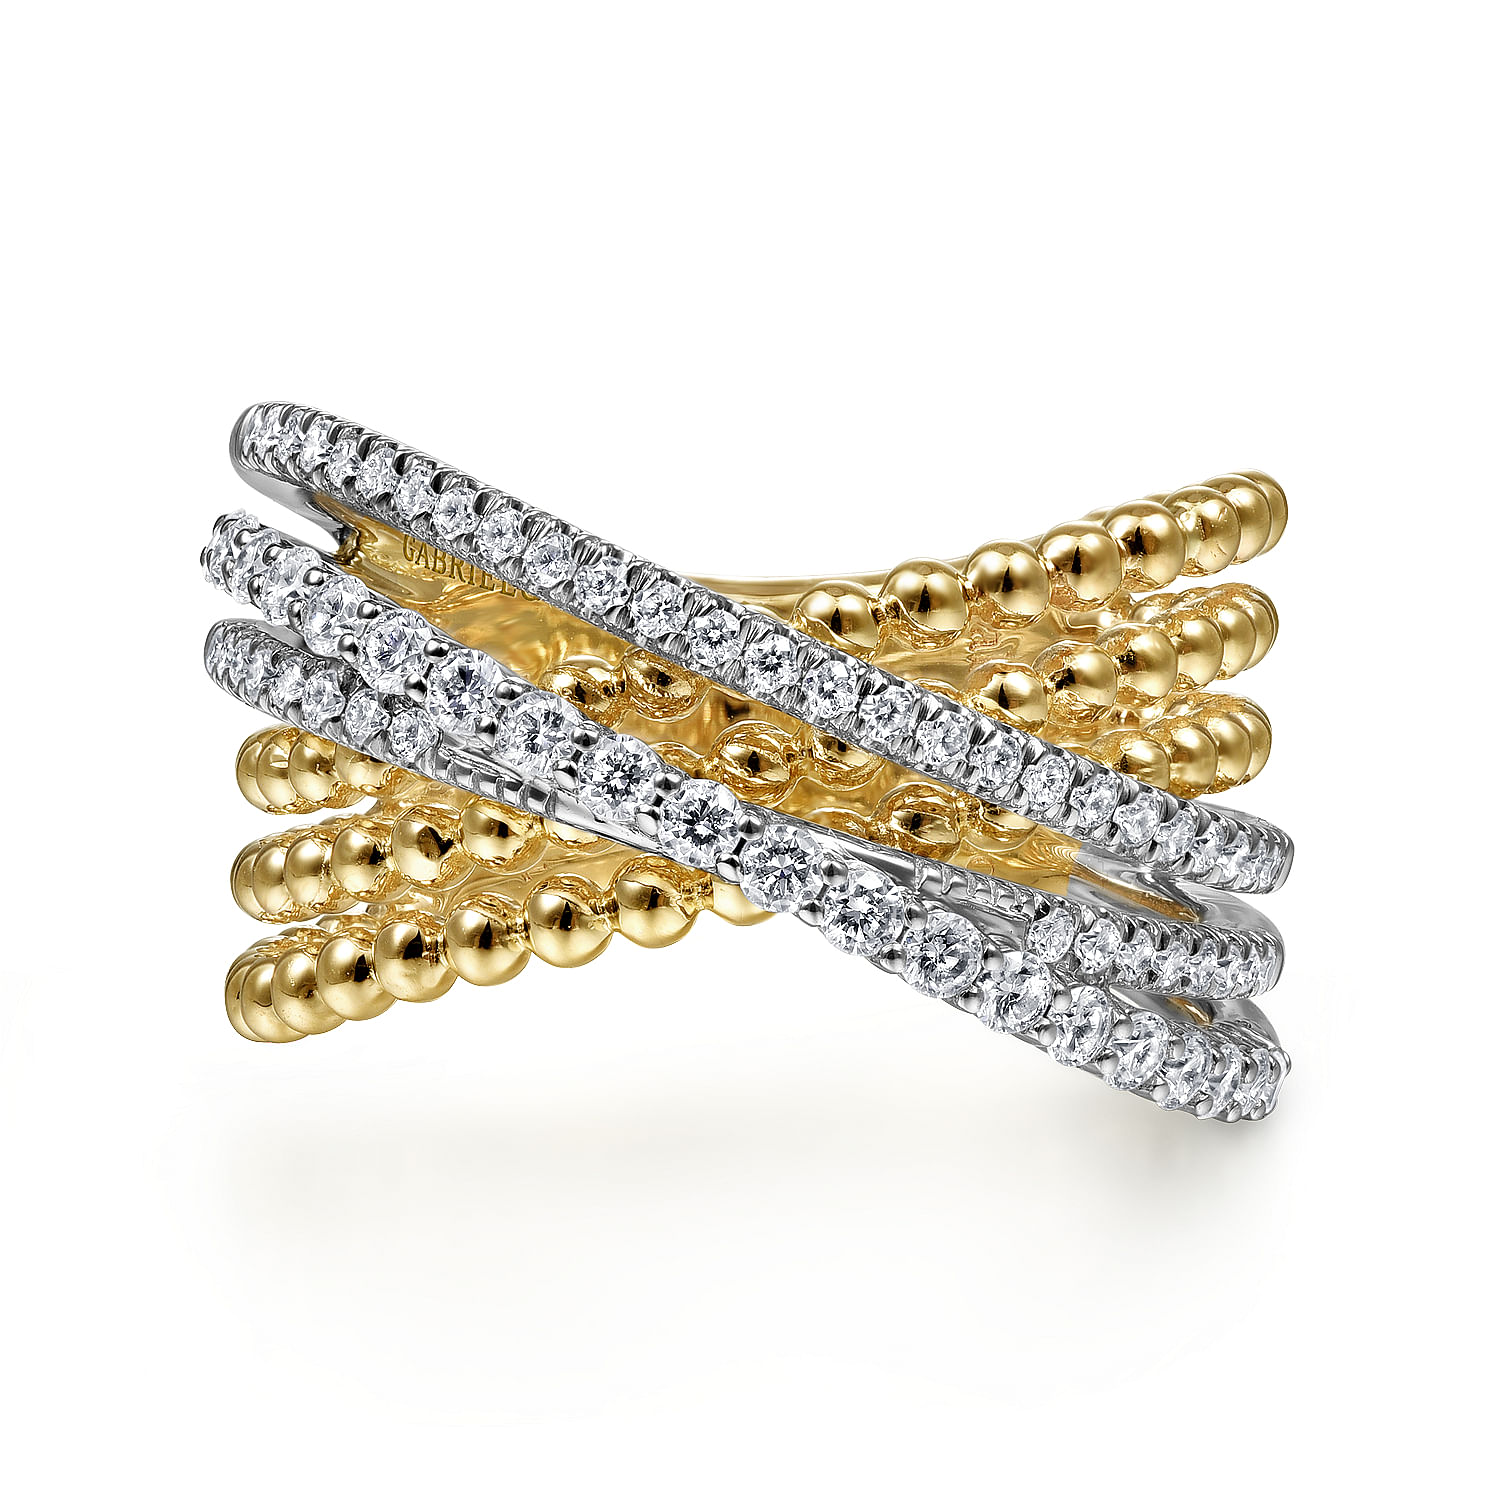 14K Yellow Gold Twisted Braided Diamond Wide Band Ring - LR51558Y45JJ